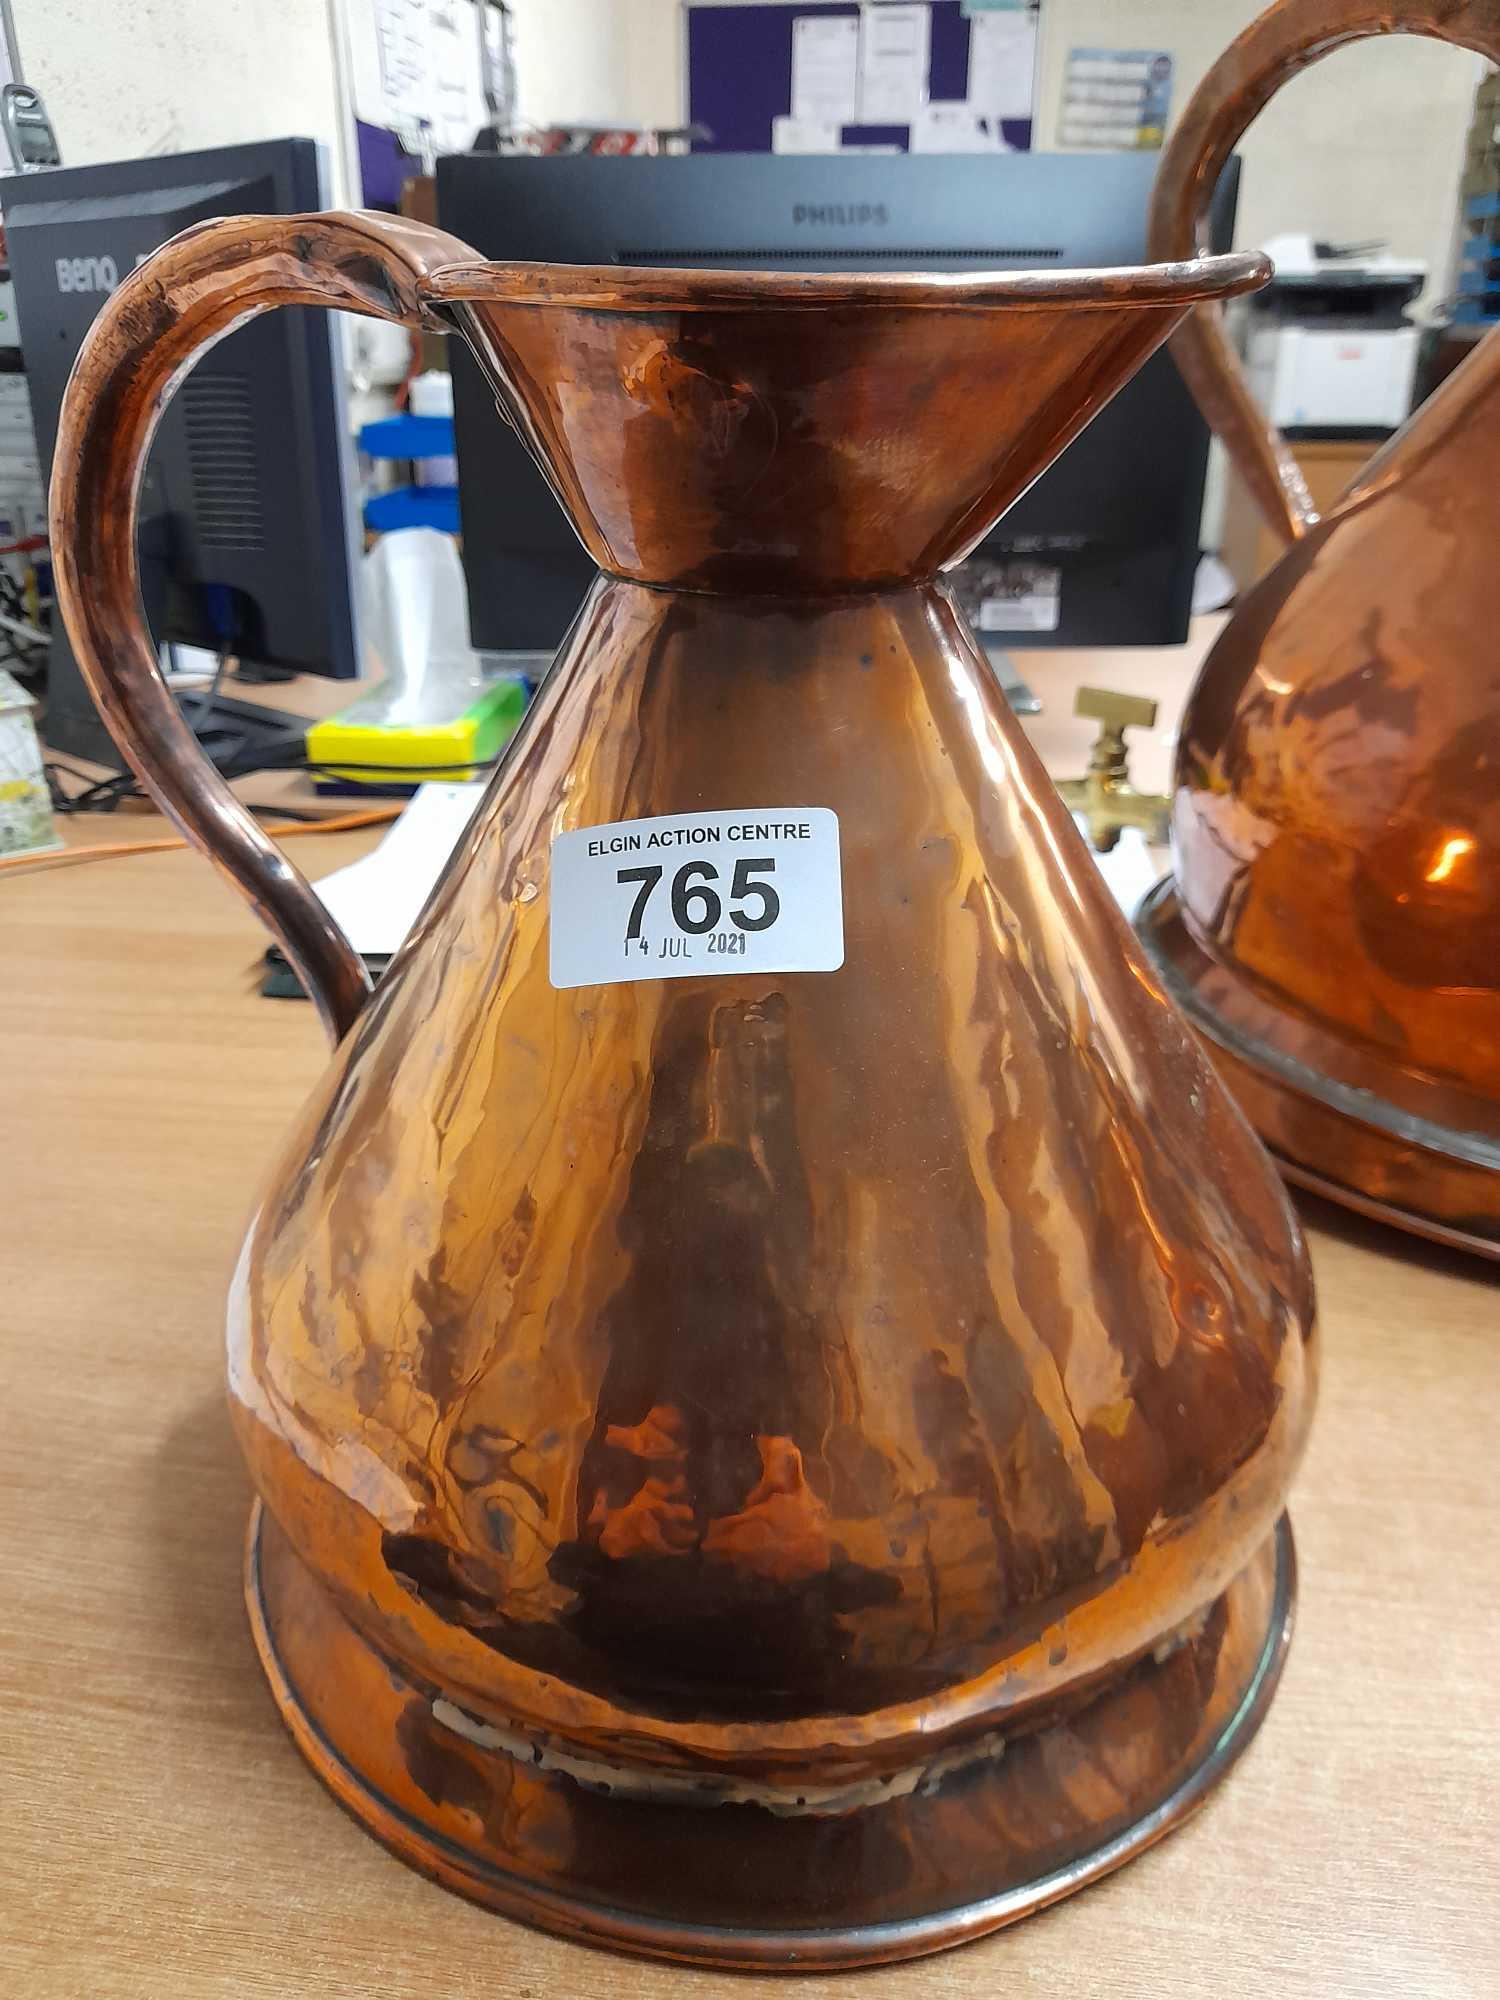 2 GALLON COPPER WHISKY MEASURING JUG - Image 2 of 21